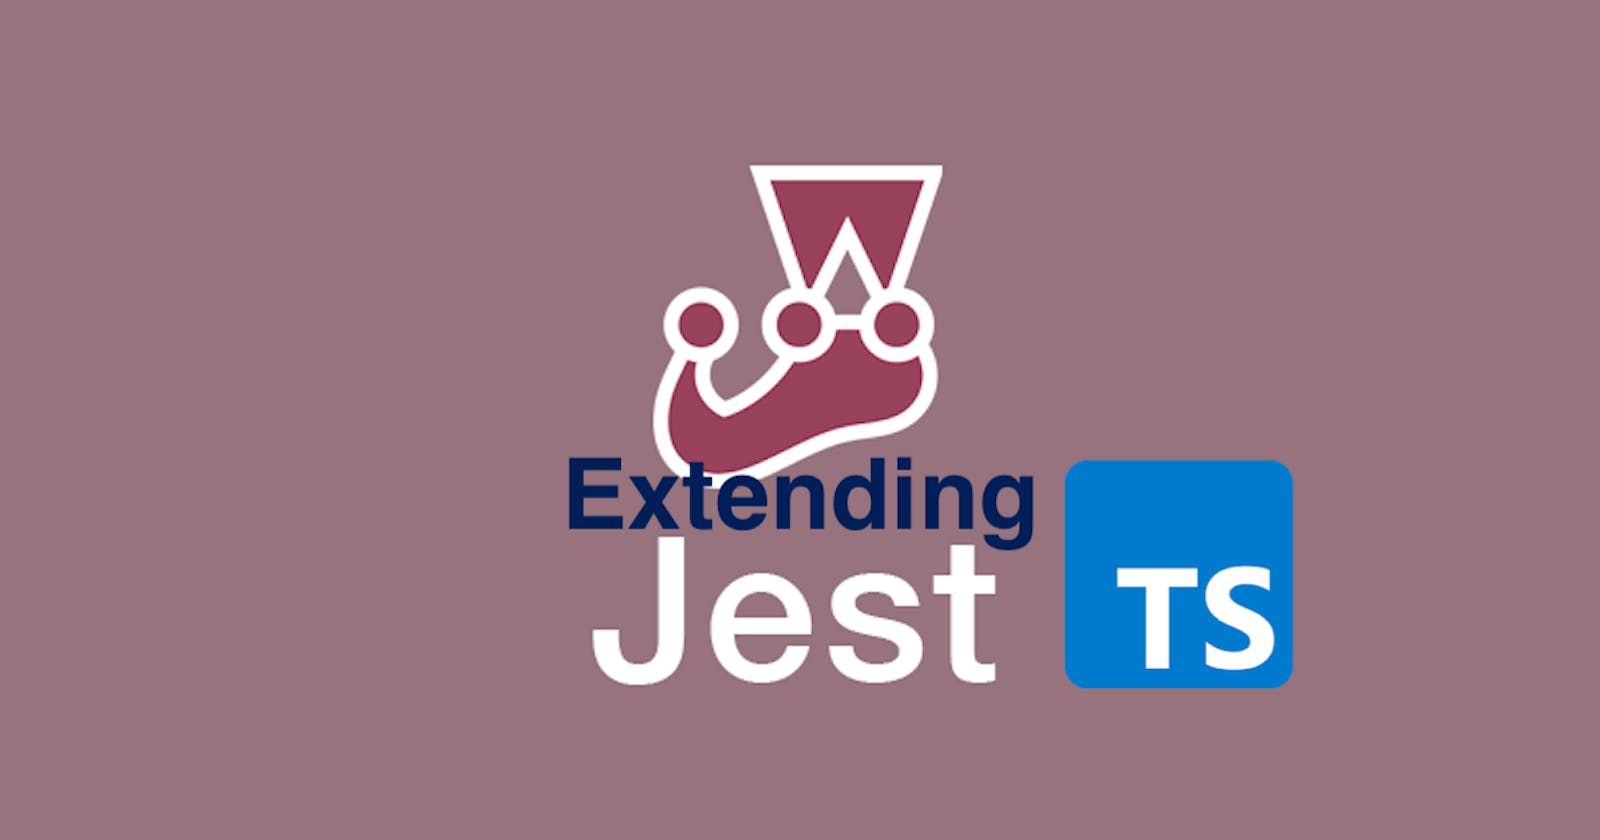 How to test the Error cause with Jest and TypeScript